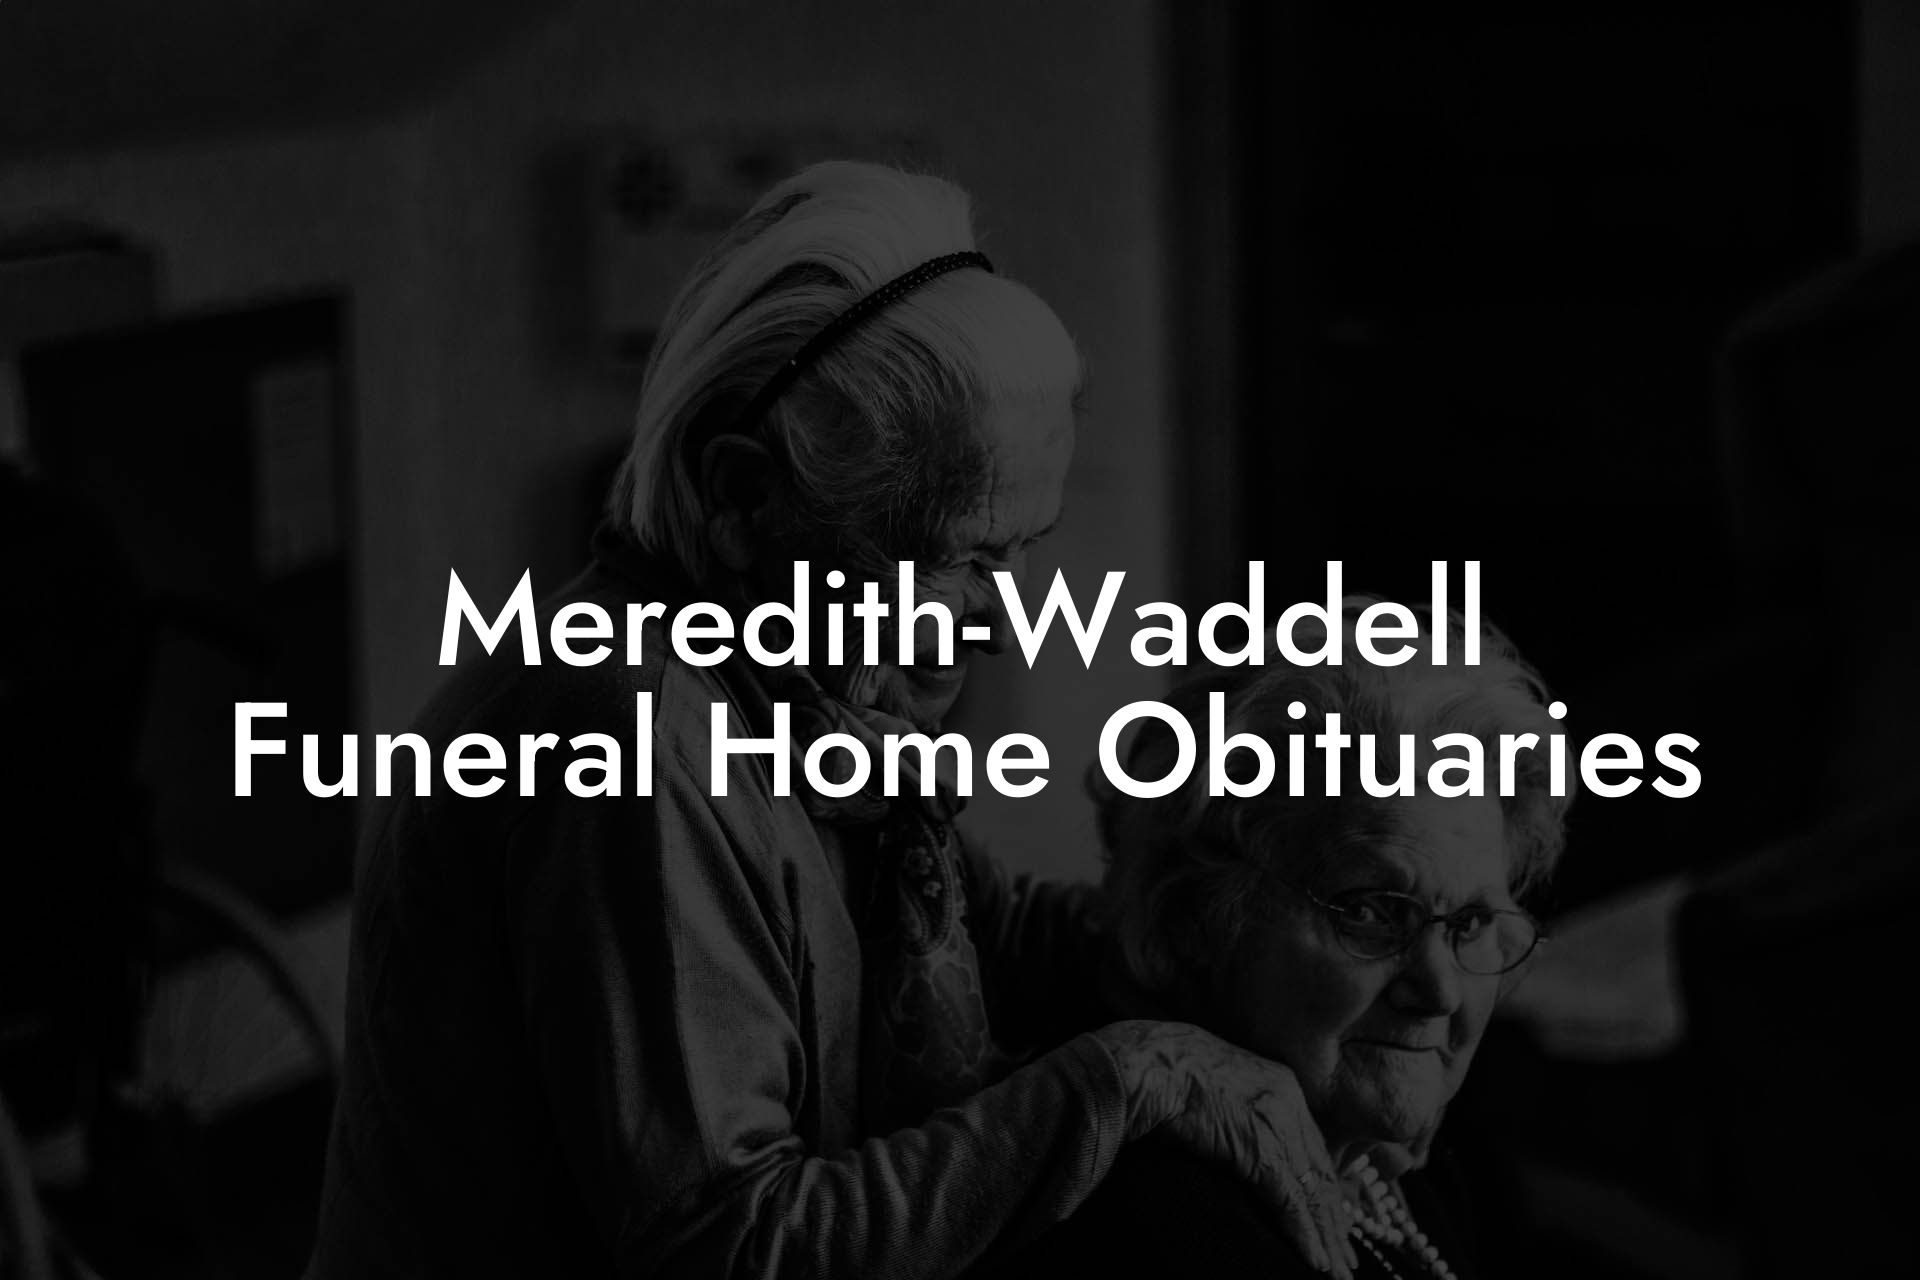 Meredith-Waddell Funeral Home Obituaries